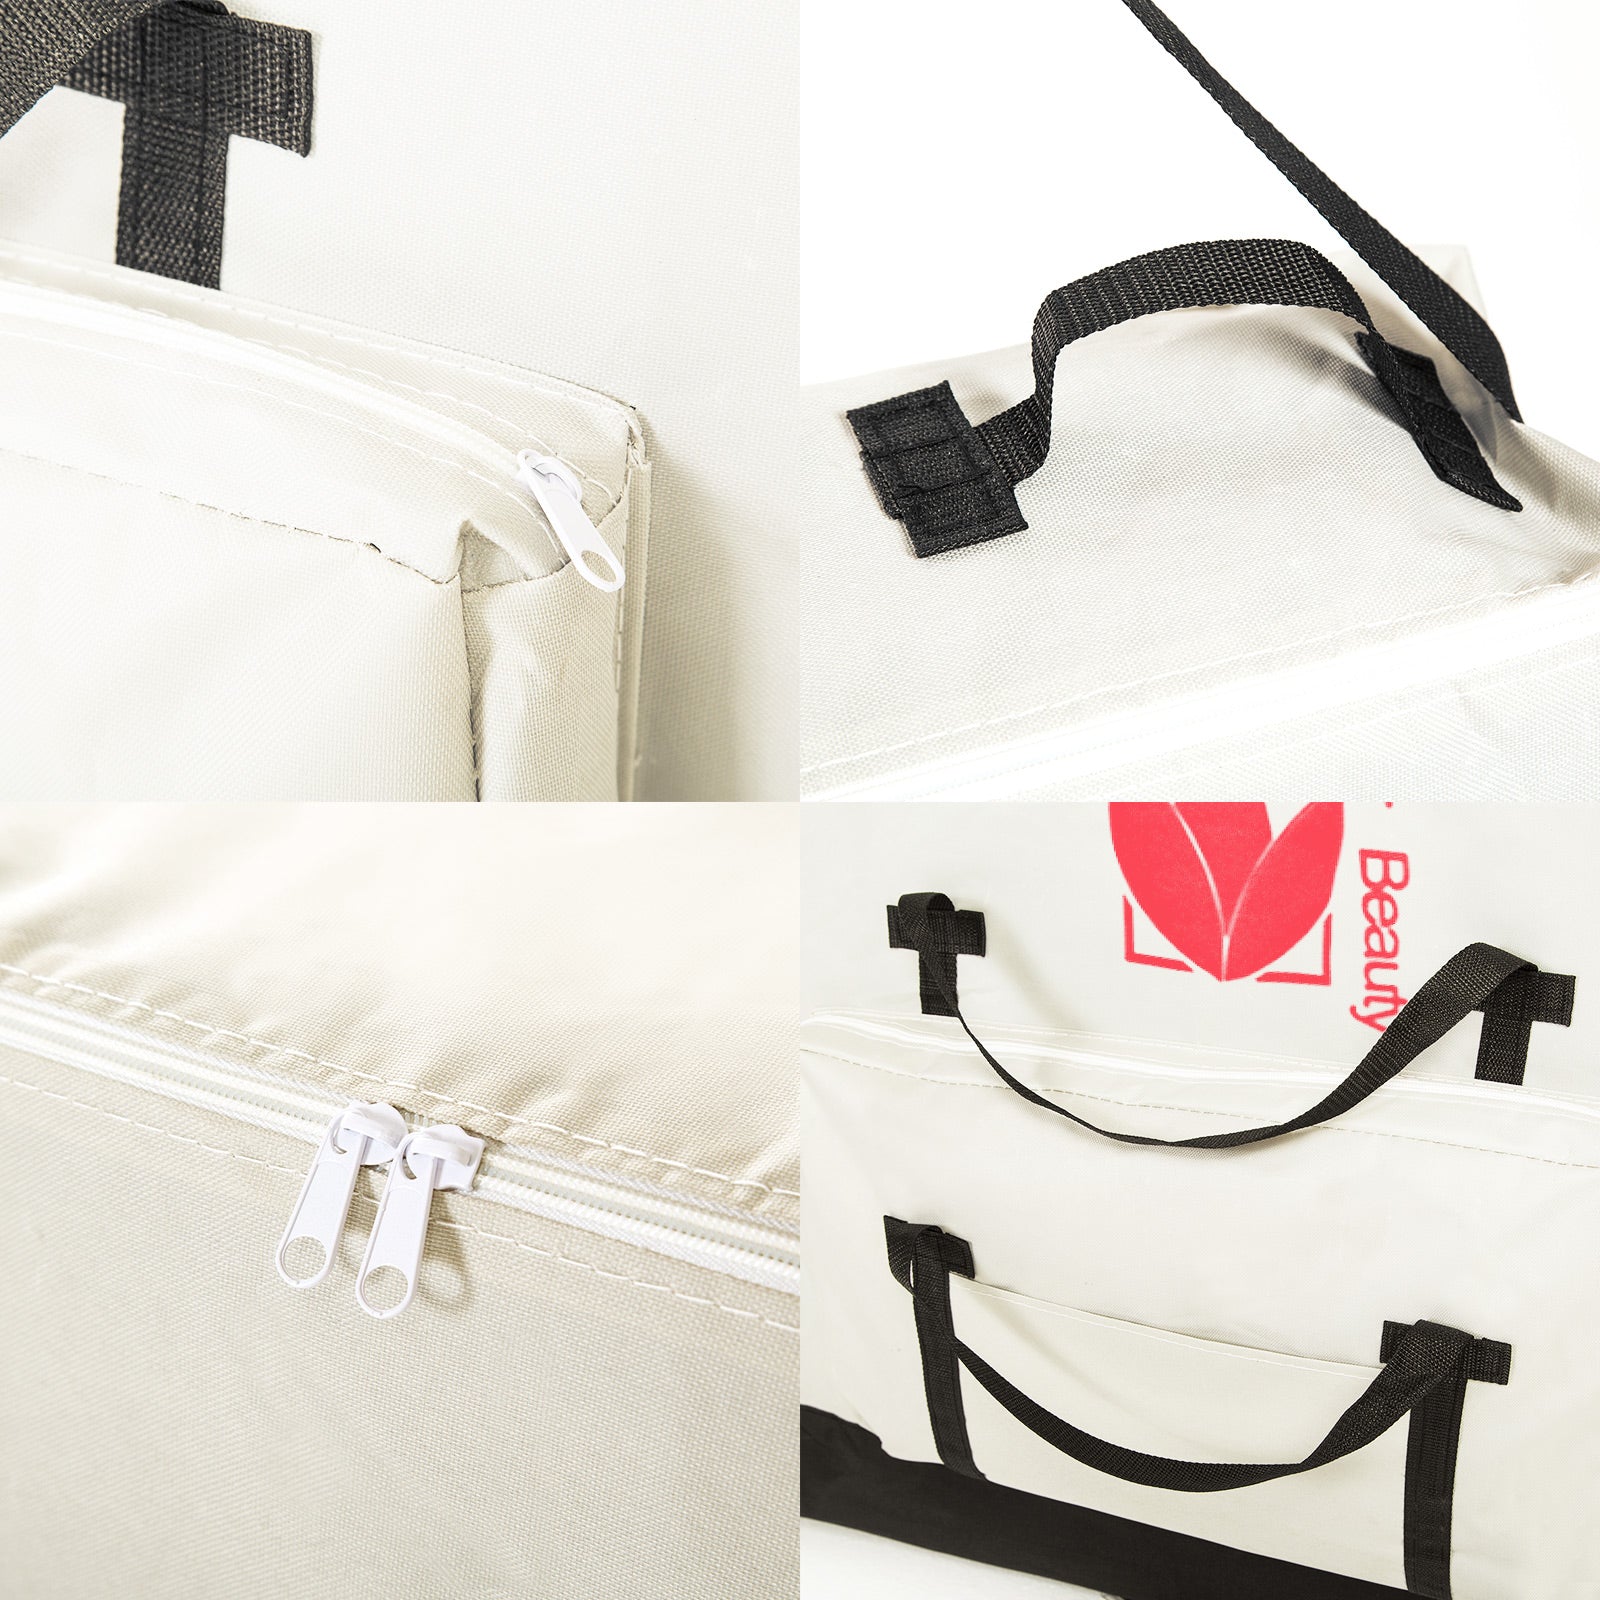 forever-beauty-white-massage-table-bed-delux-carry-bag-portable-wheeled-70cm